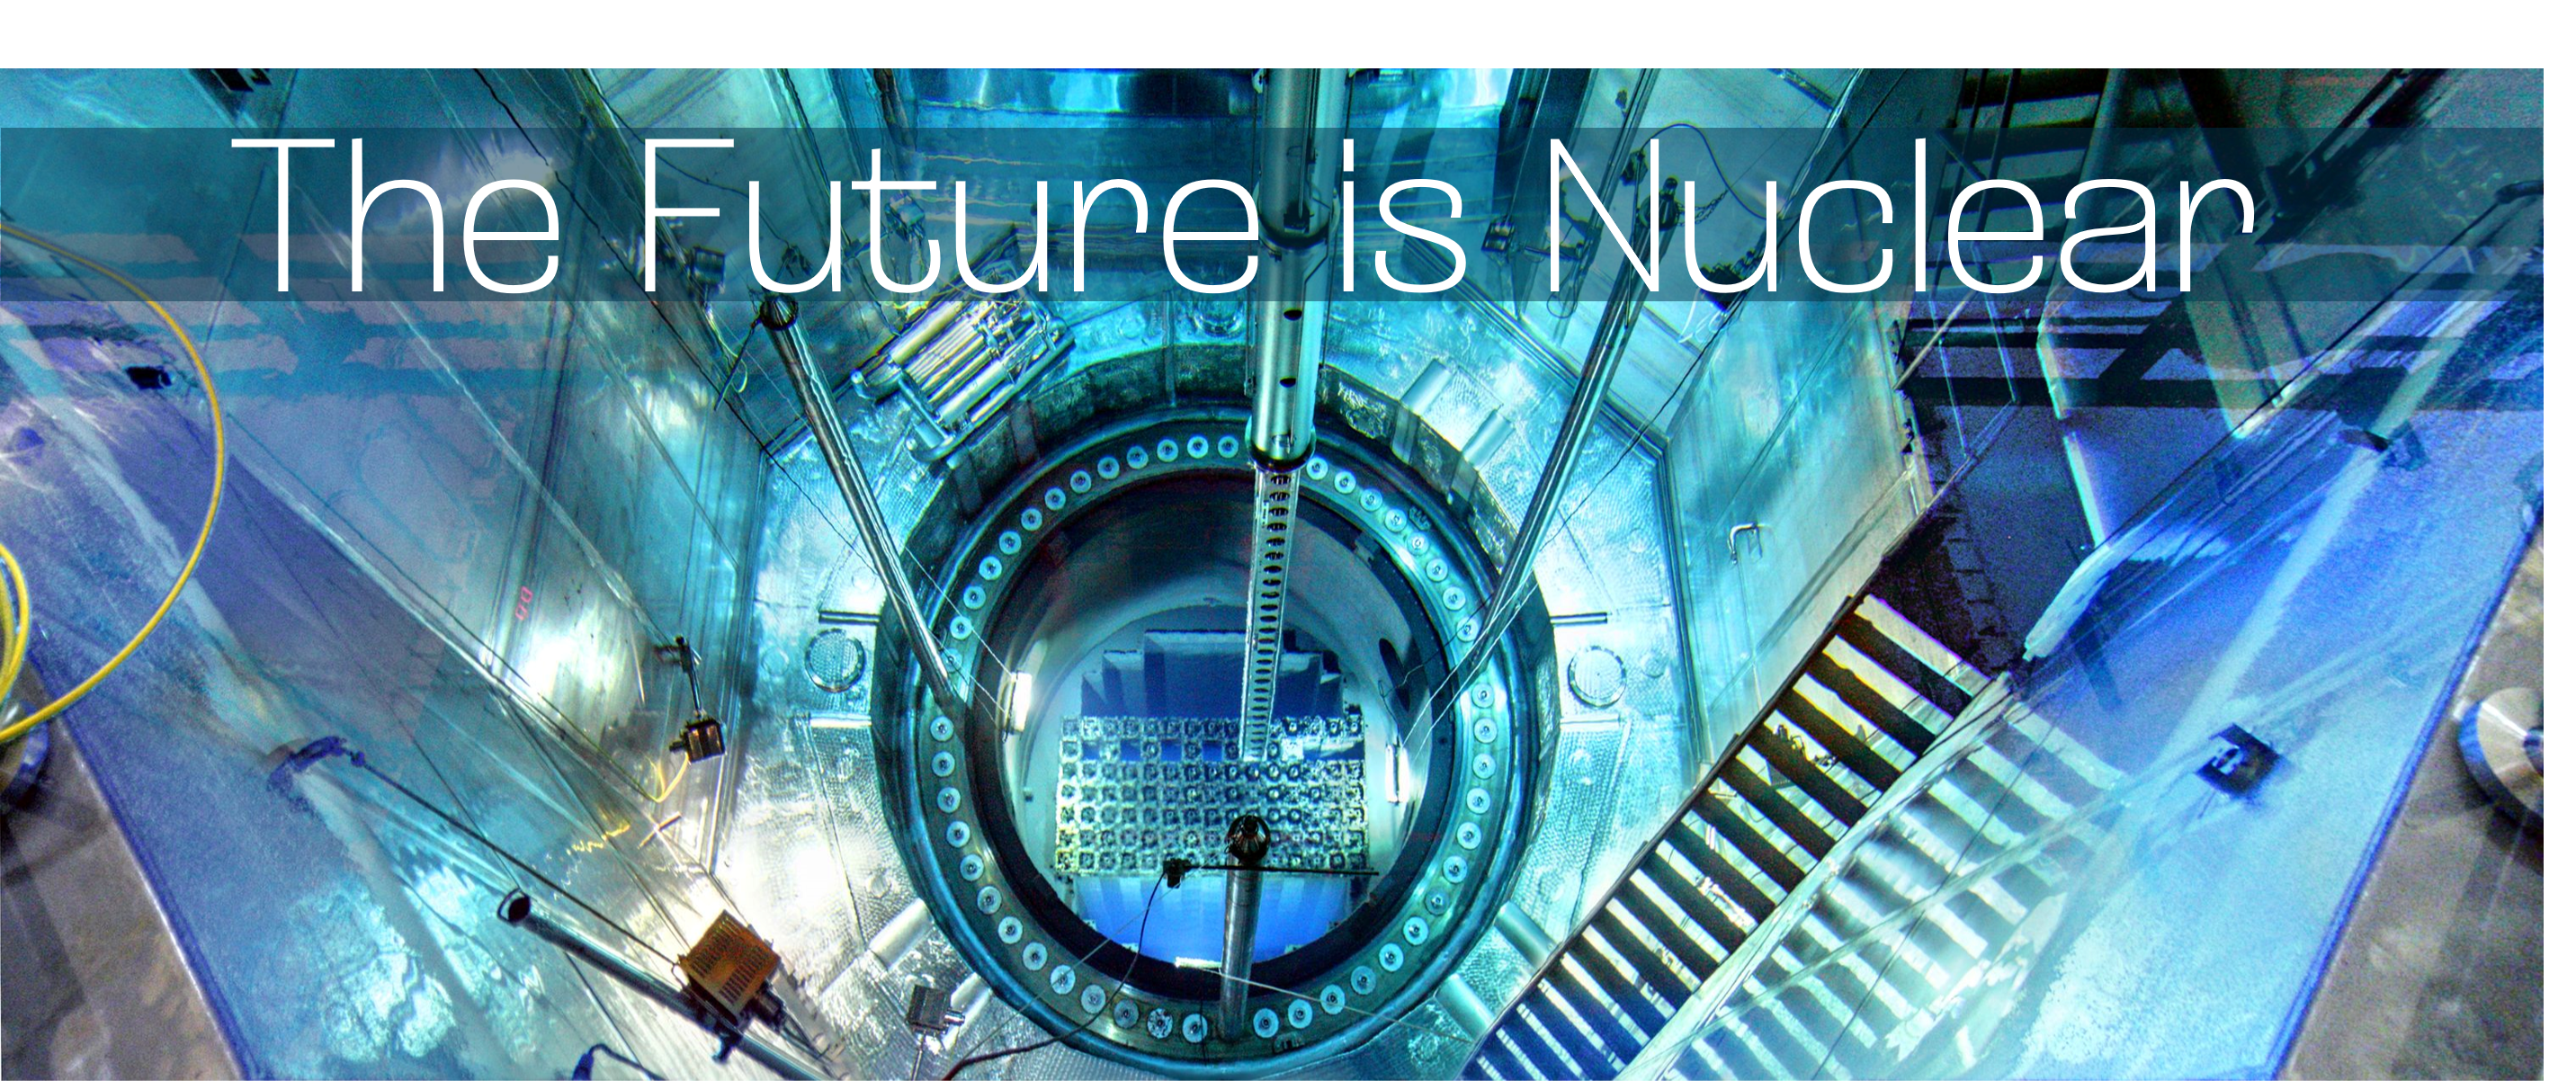 The Future is Nuclear